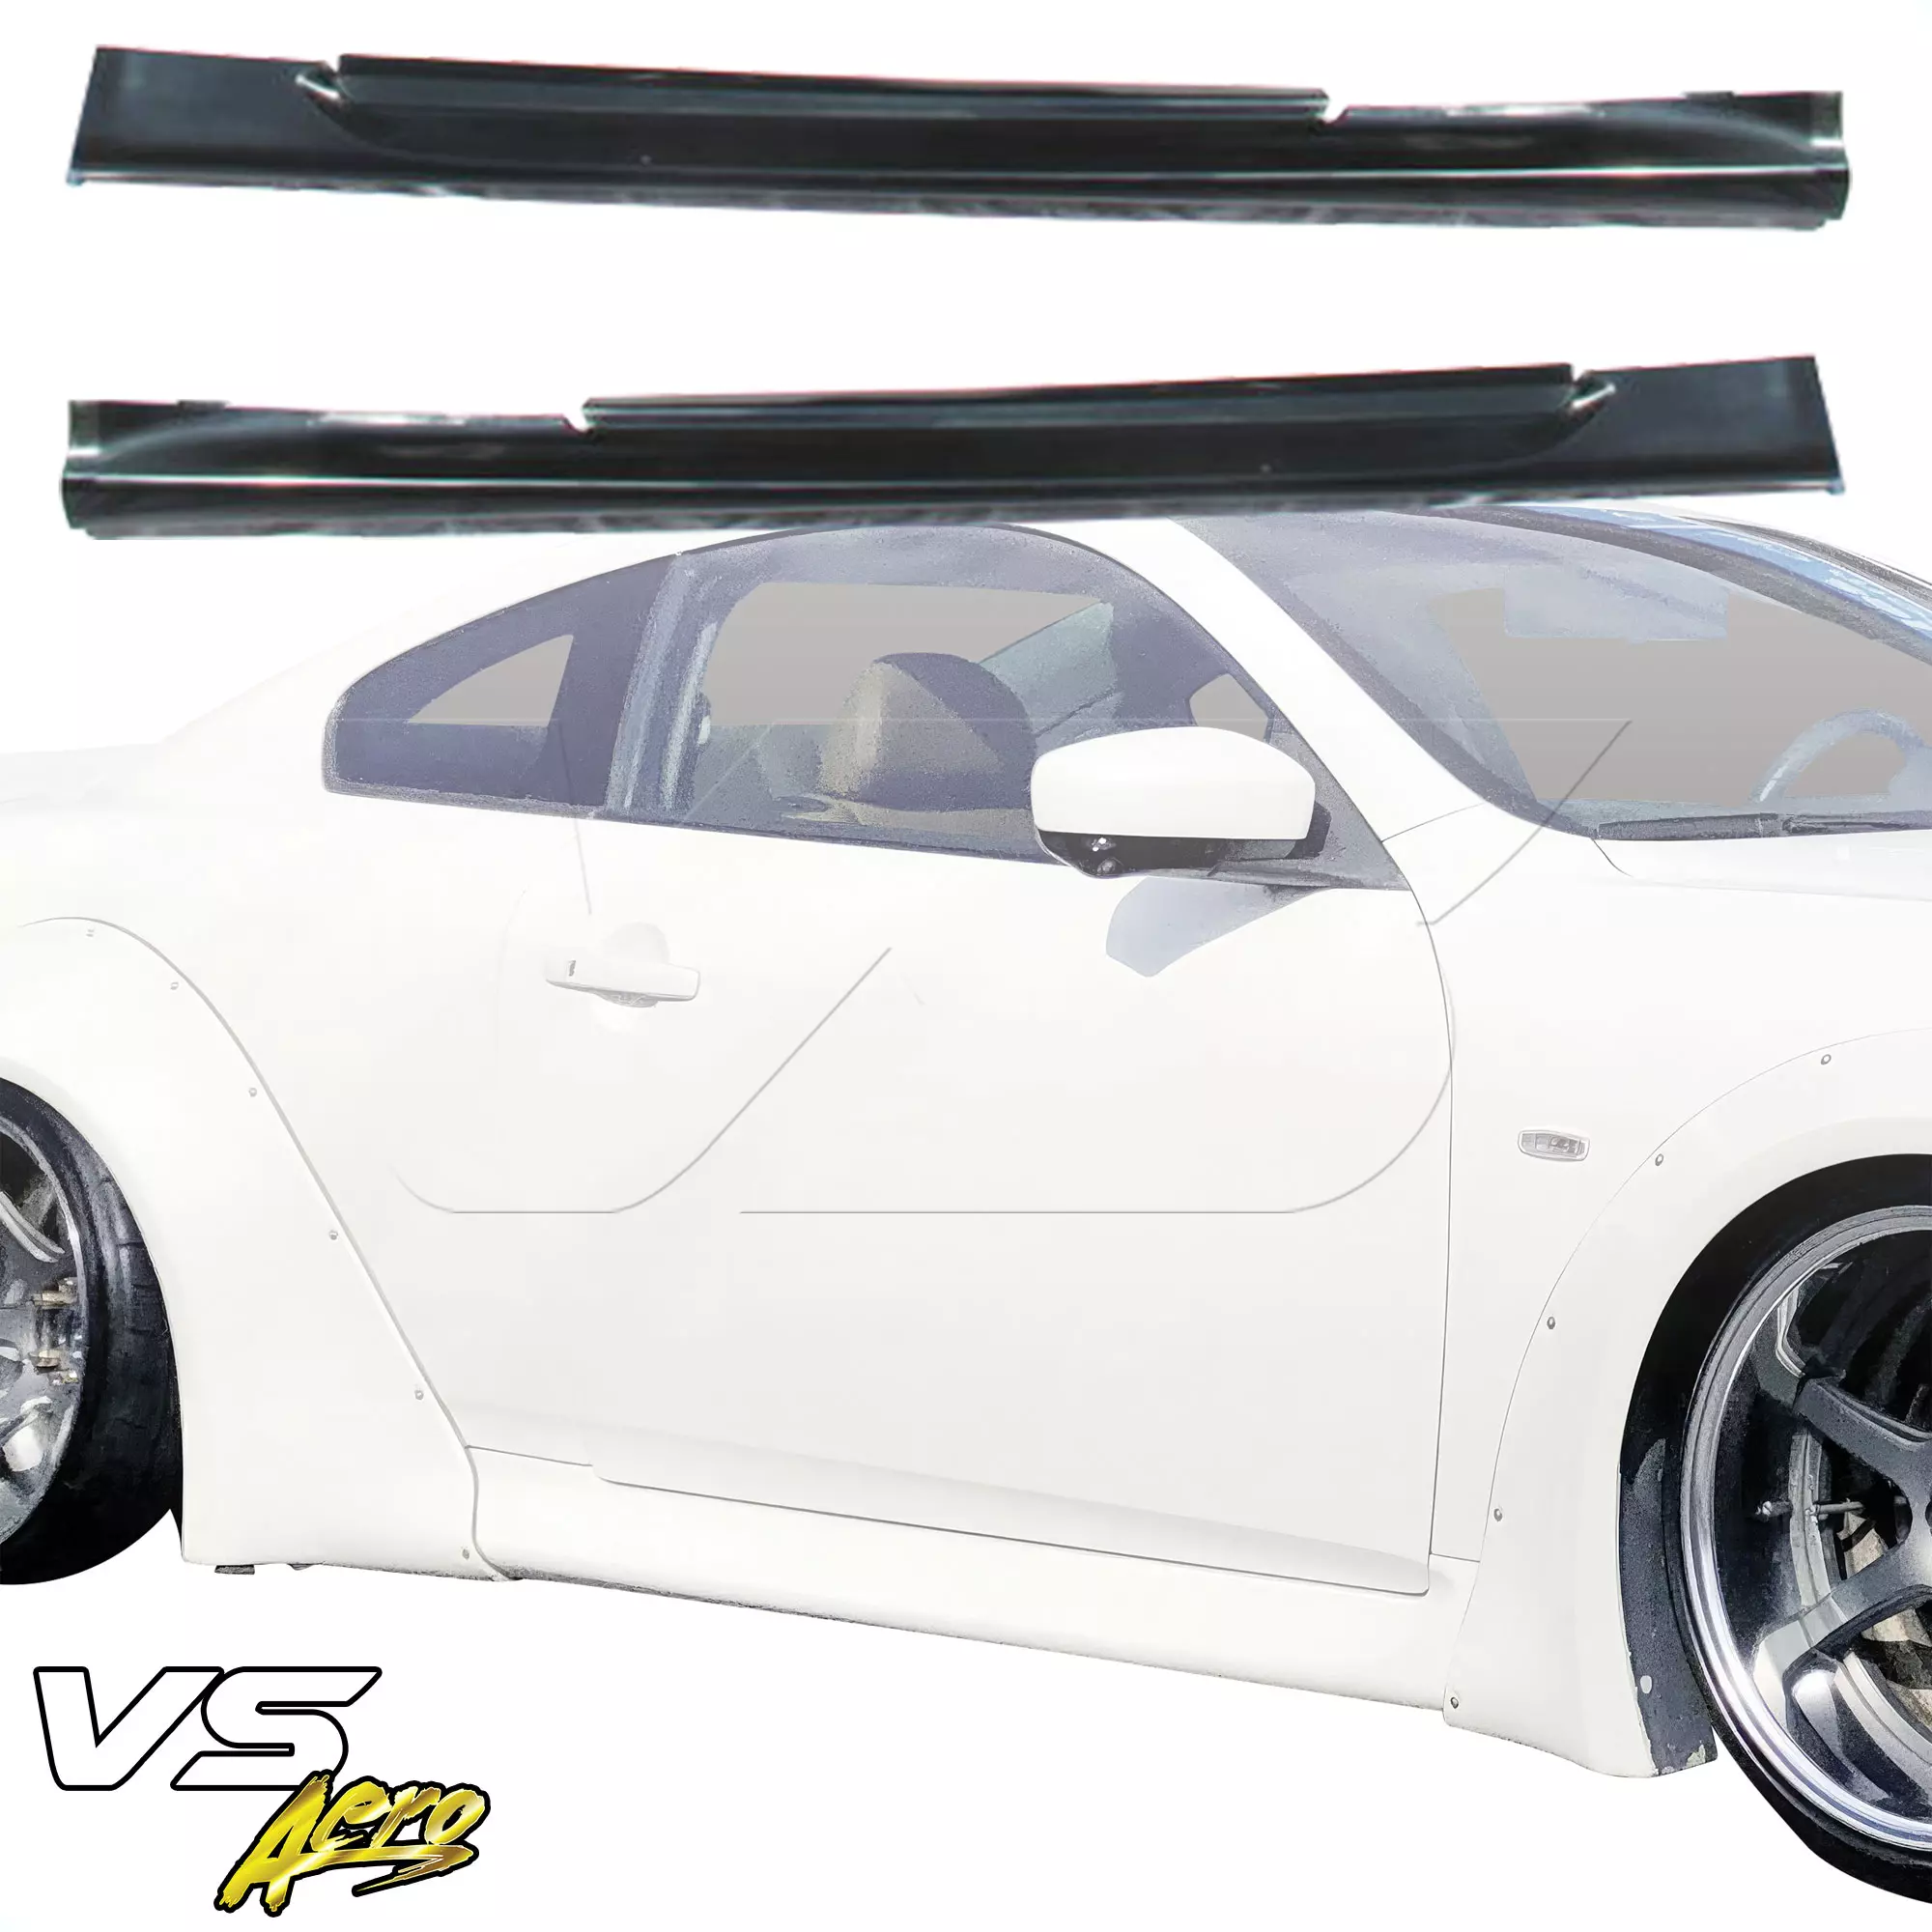 VSaero FRP LBPE Wide Body Side Skirts > Infiniti G37 Coupe 2008-2015 > 2dr Coupe - Image 29